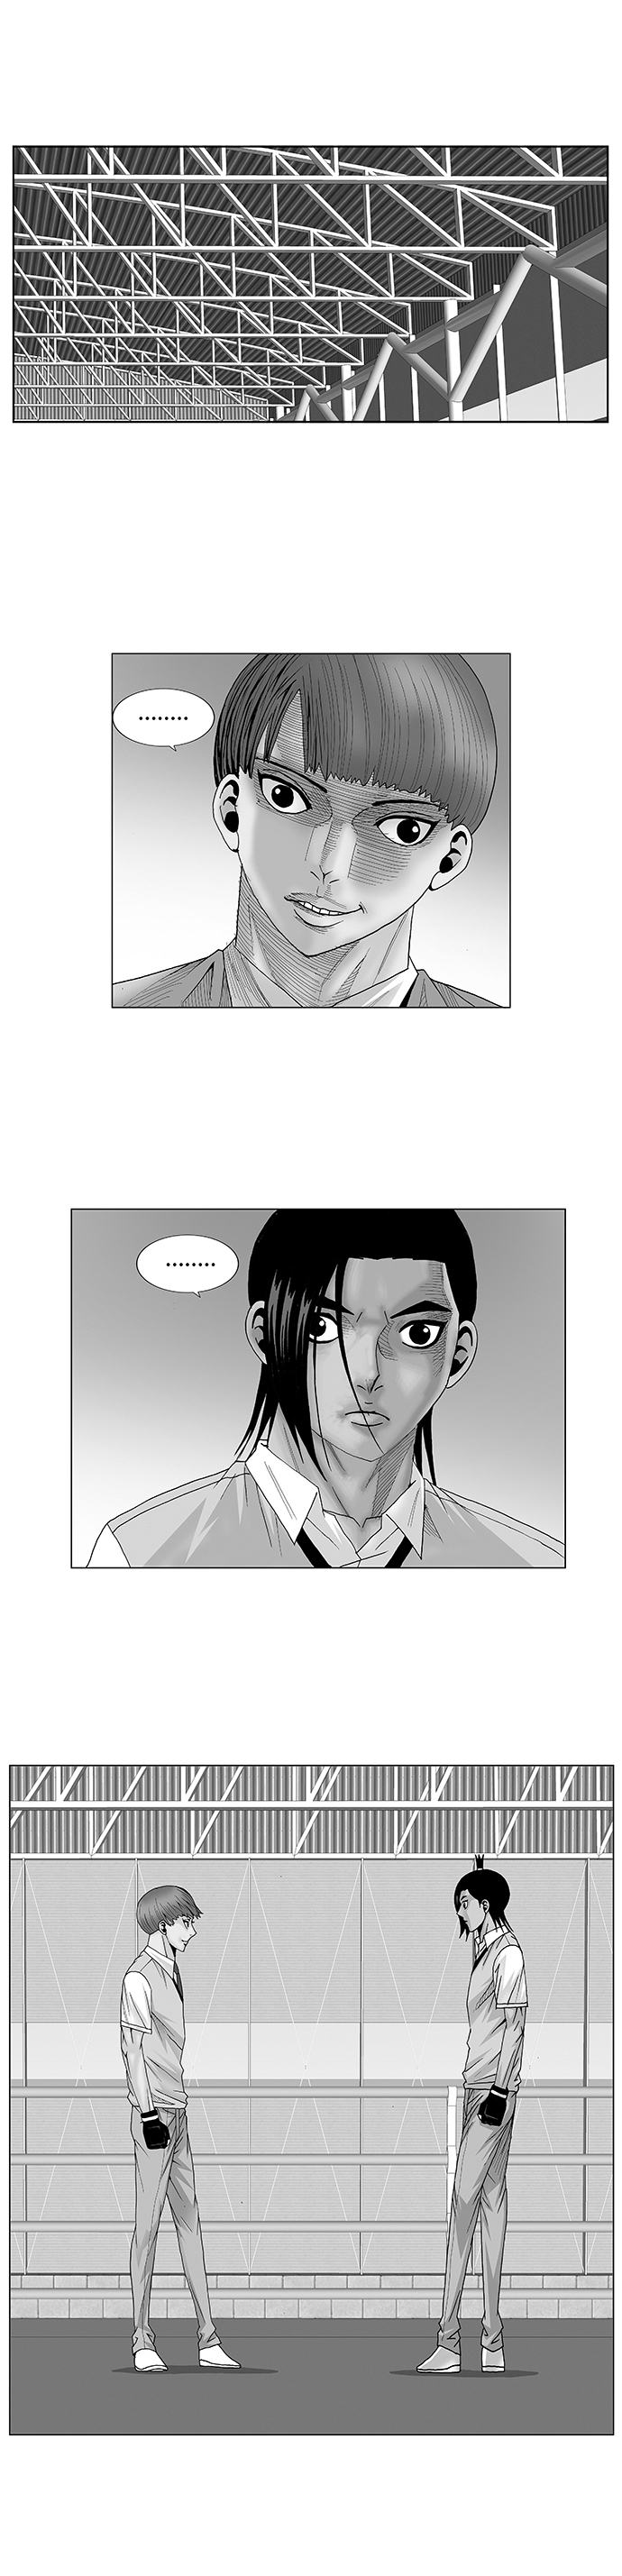 Ultimate Legend - Kang Hae Hyo - Chapter 86 - Page 1